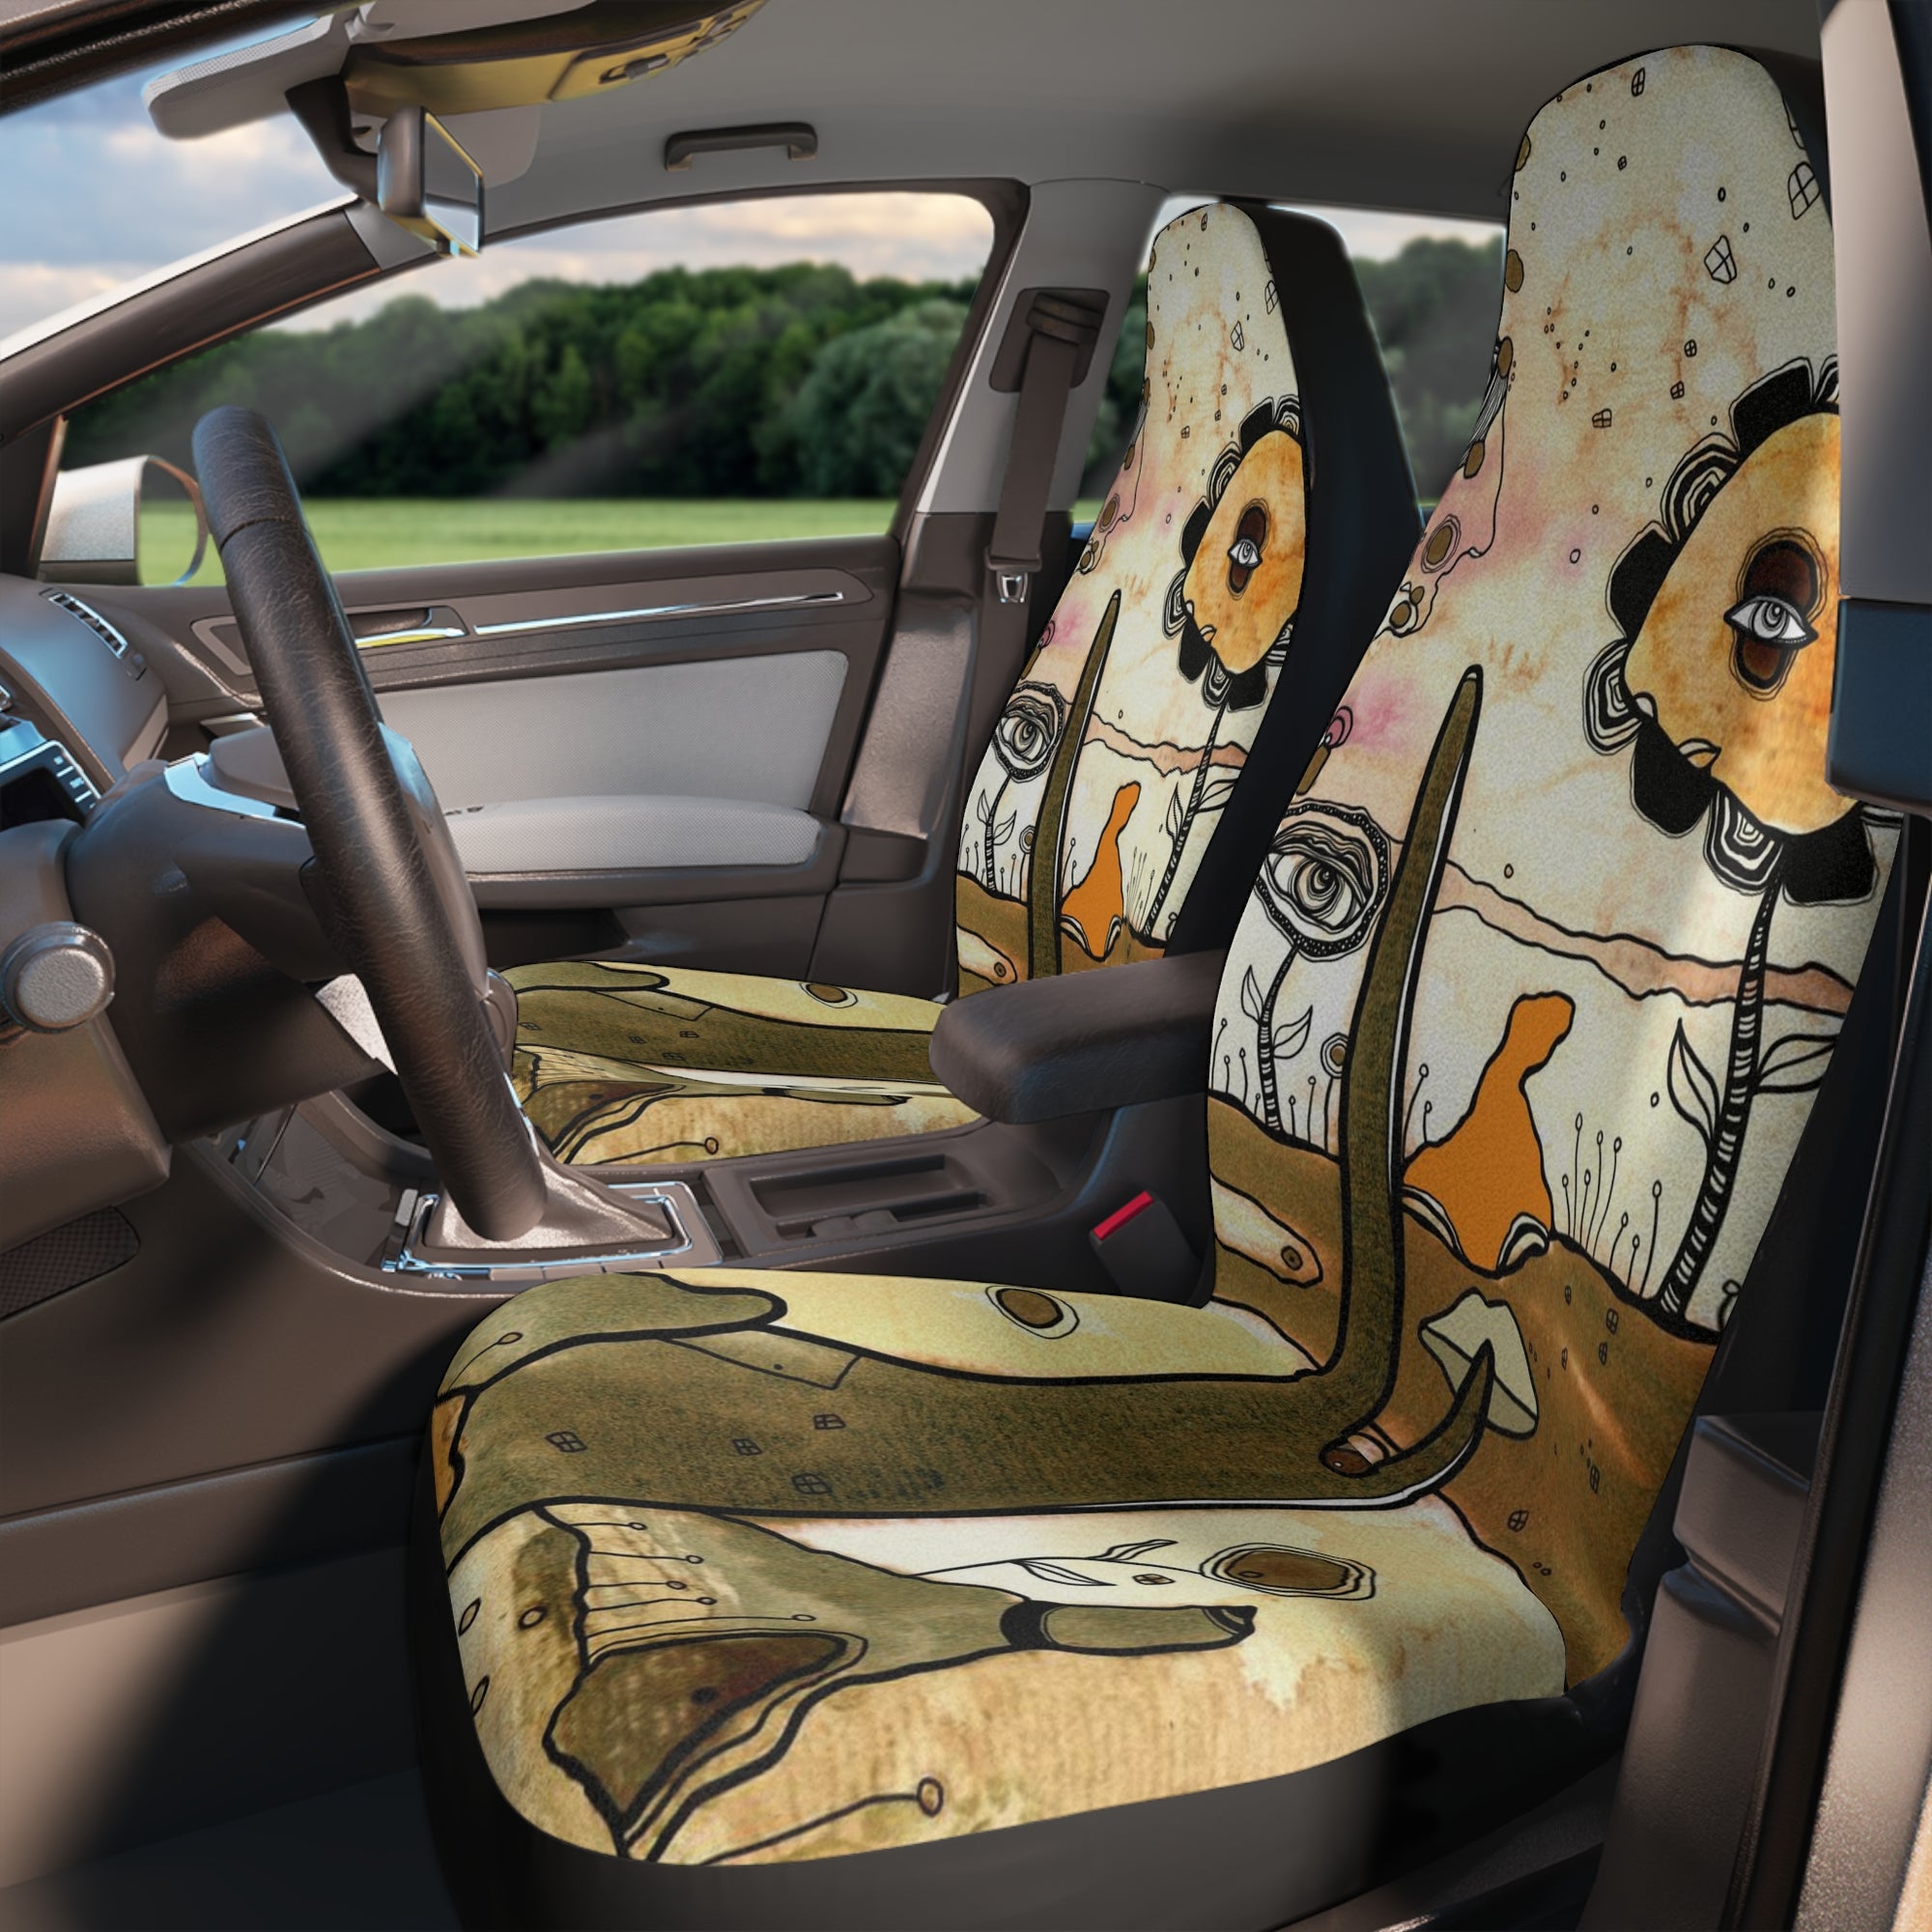 Intuitive Abstract Artwork on Car Seat Covers "Whimsical City"